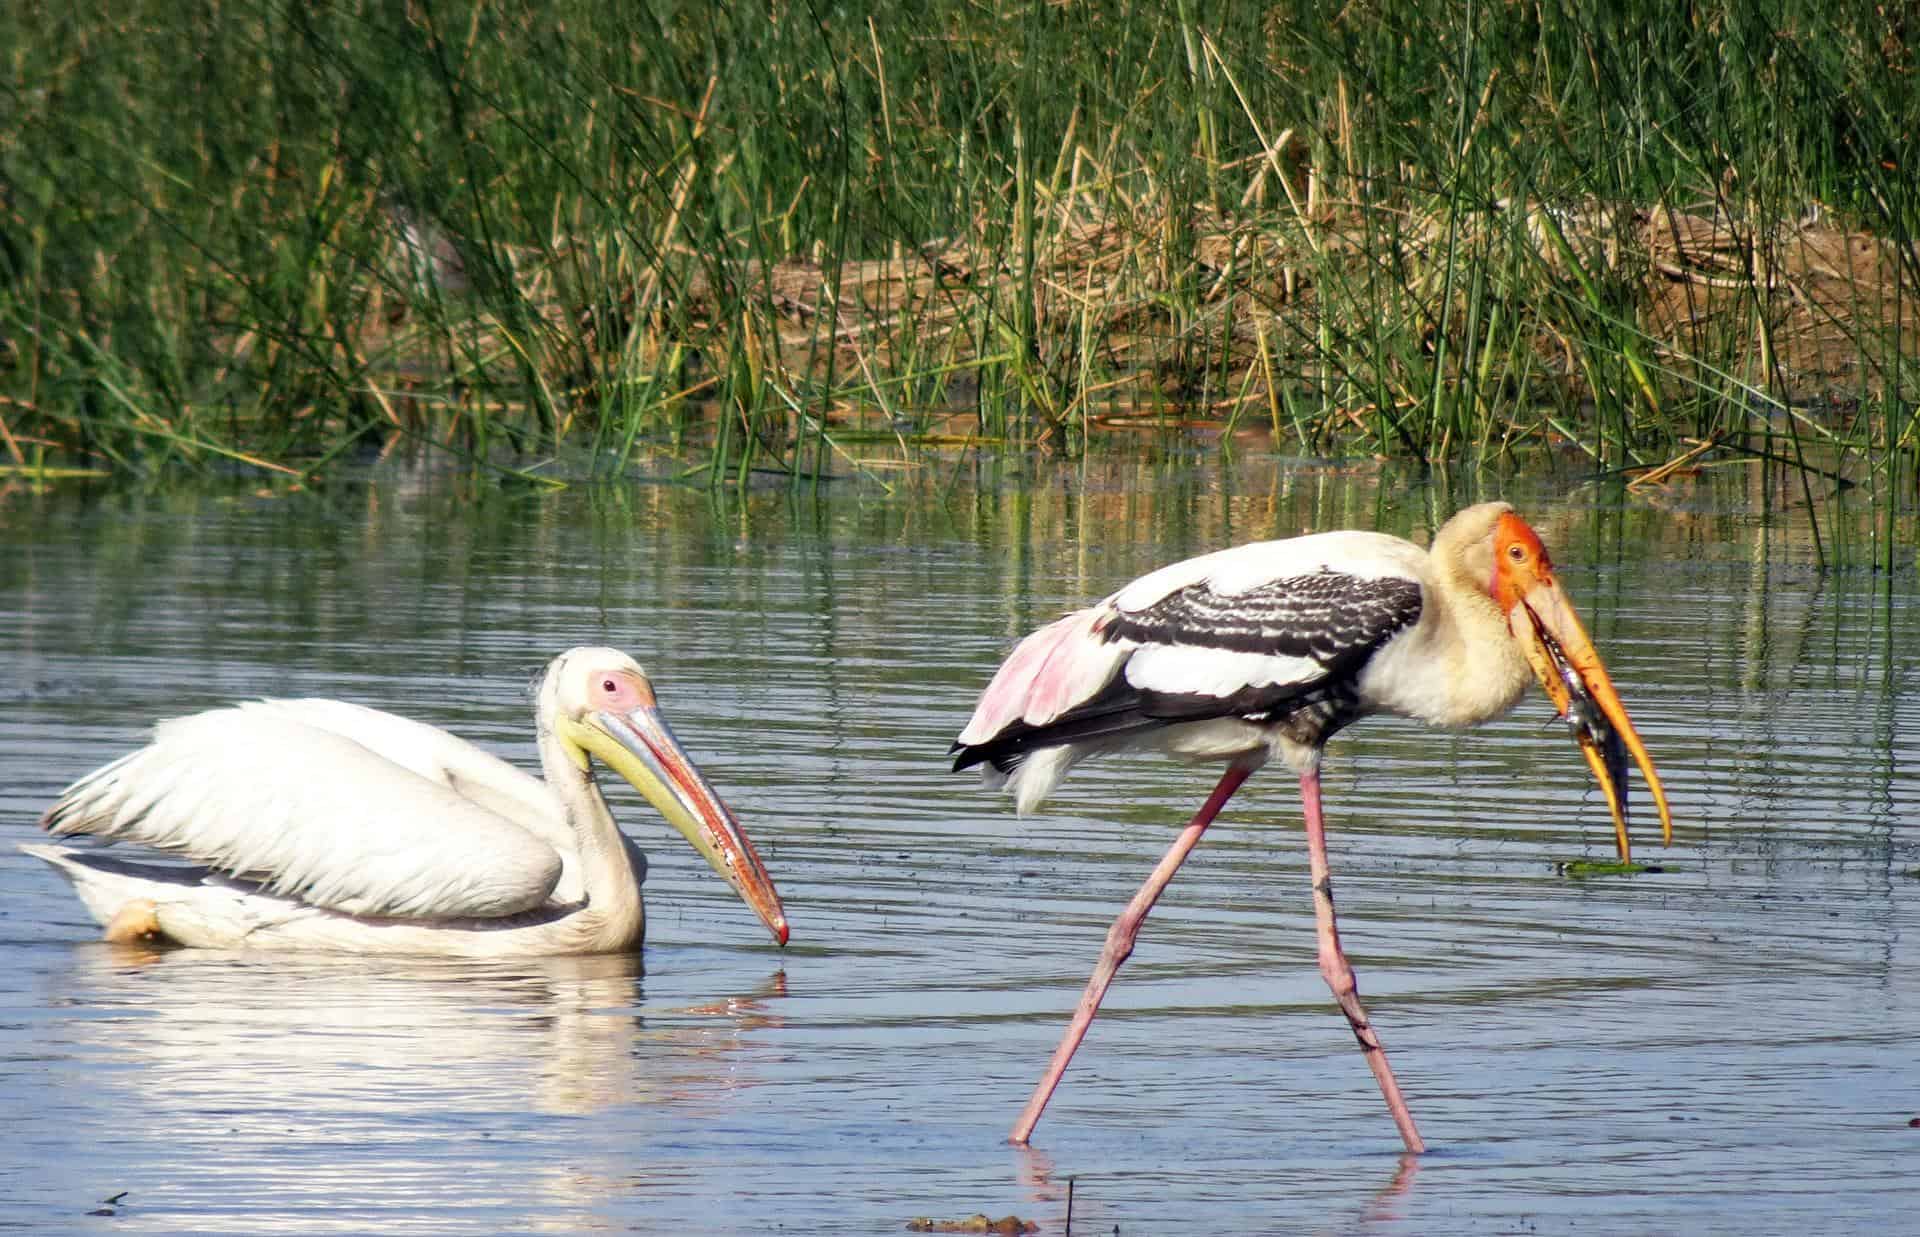 Stork Vs Pelican Vs Crane | What Are The Differences Between Them?